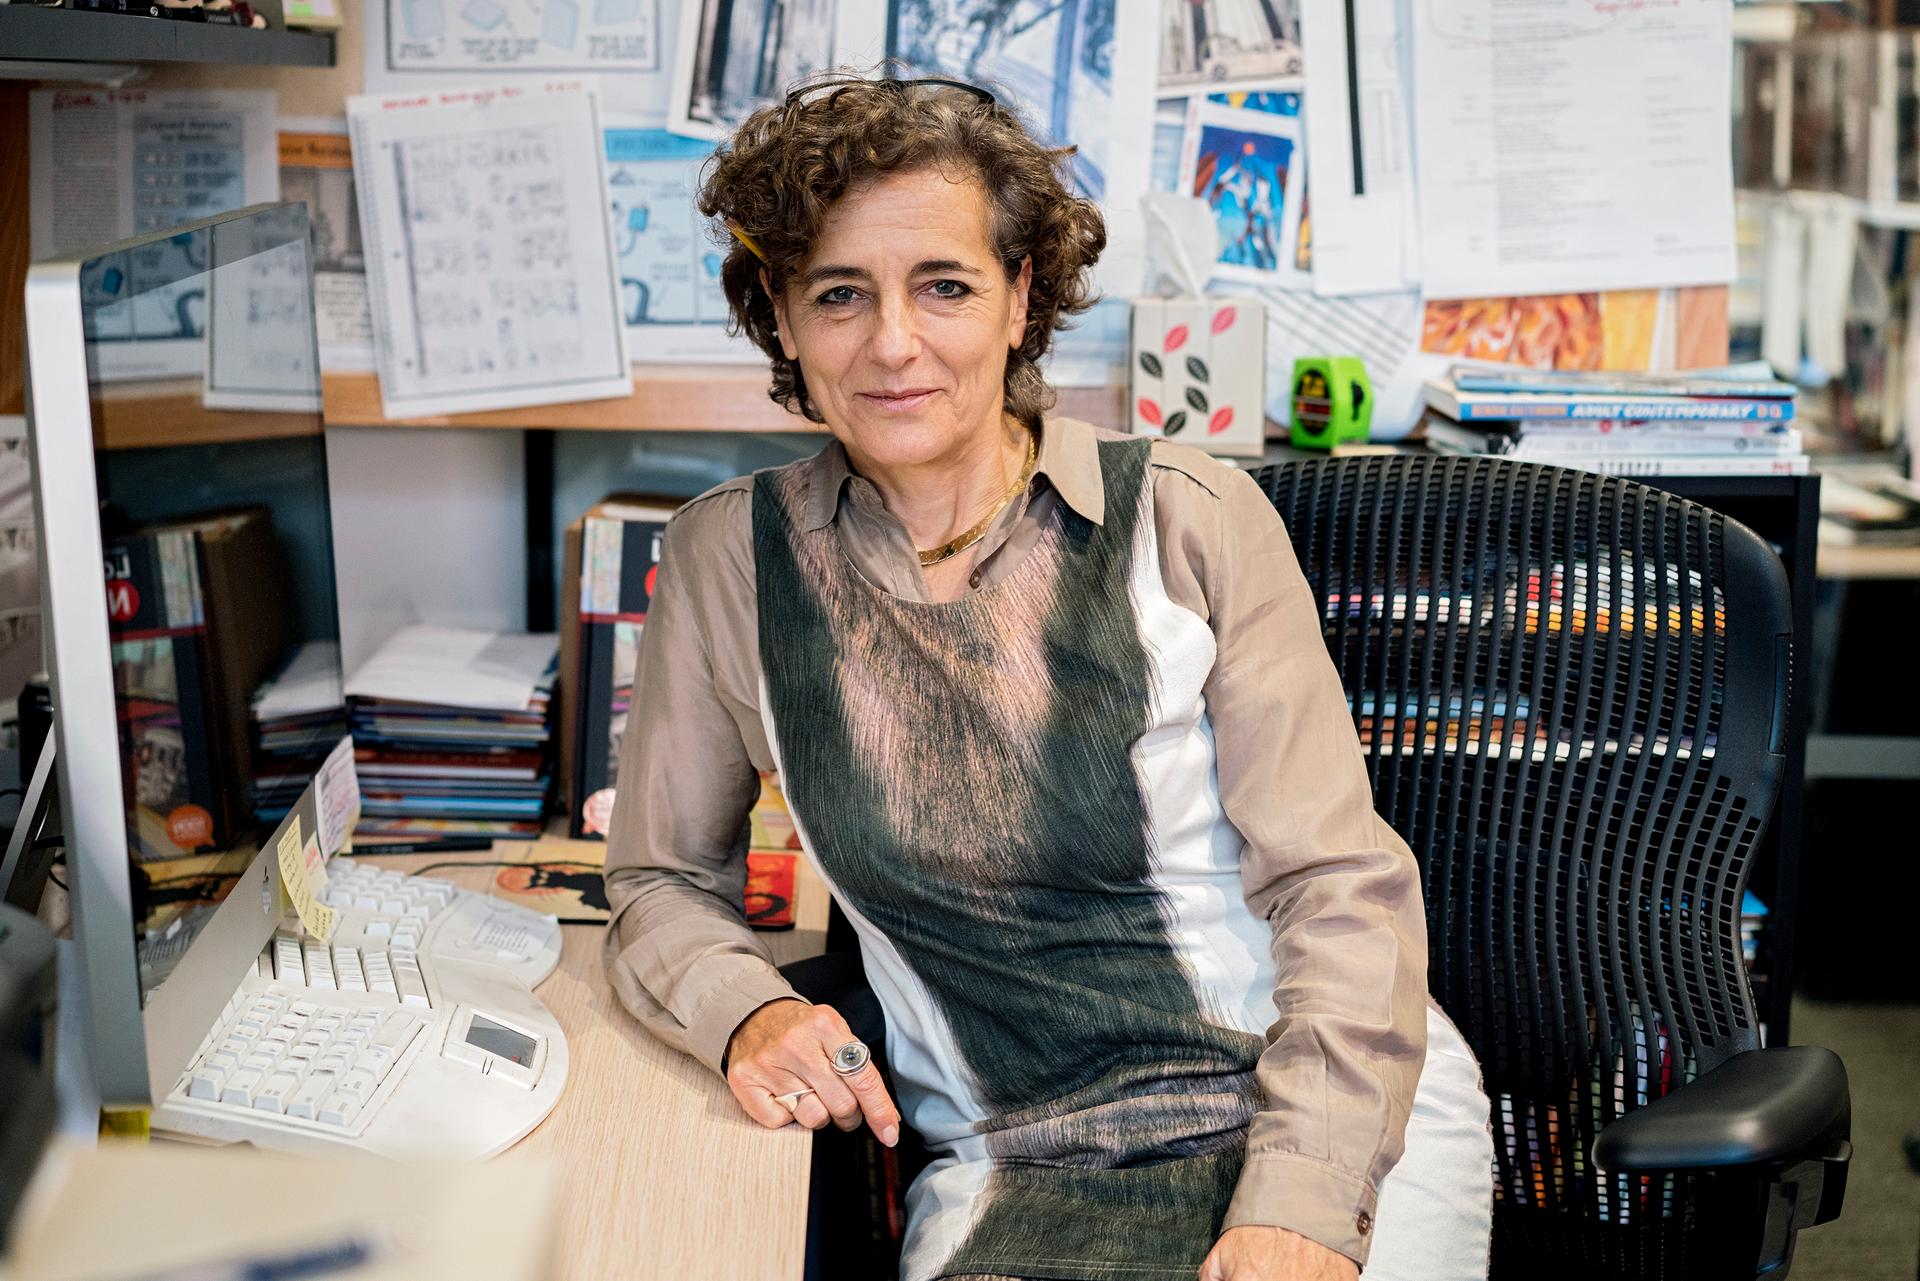 Françoise Mouly, the art editor of The New Yorker, grew up in Paris and came of age reading Charlie Hebdo.